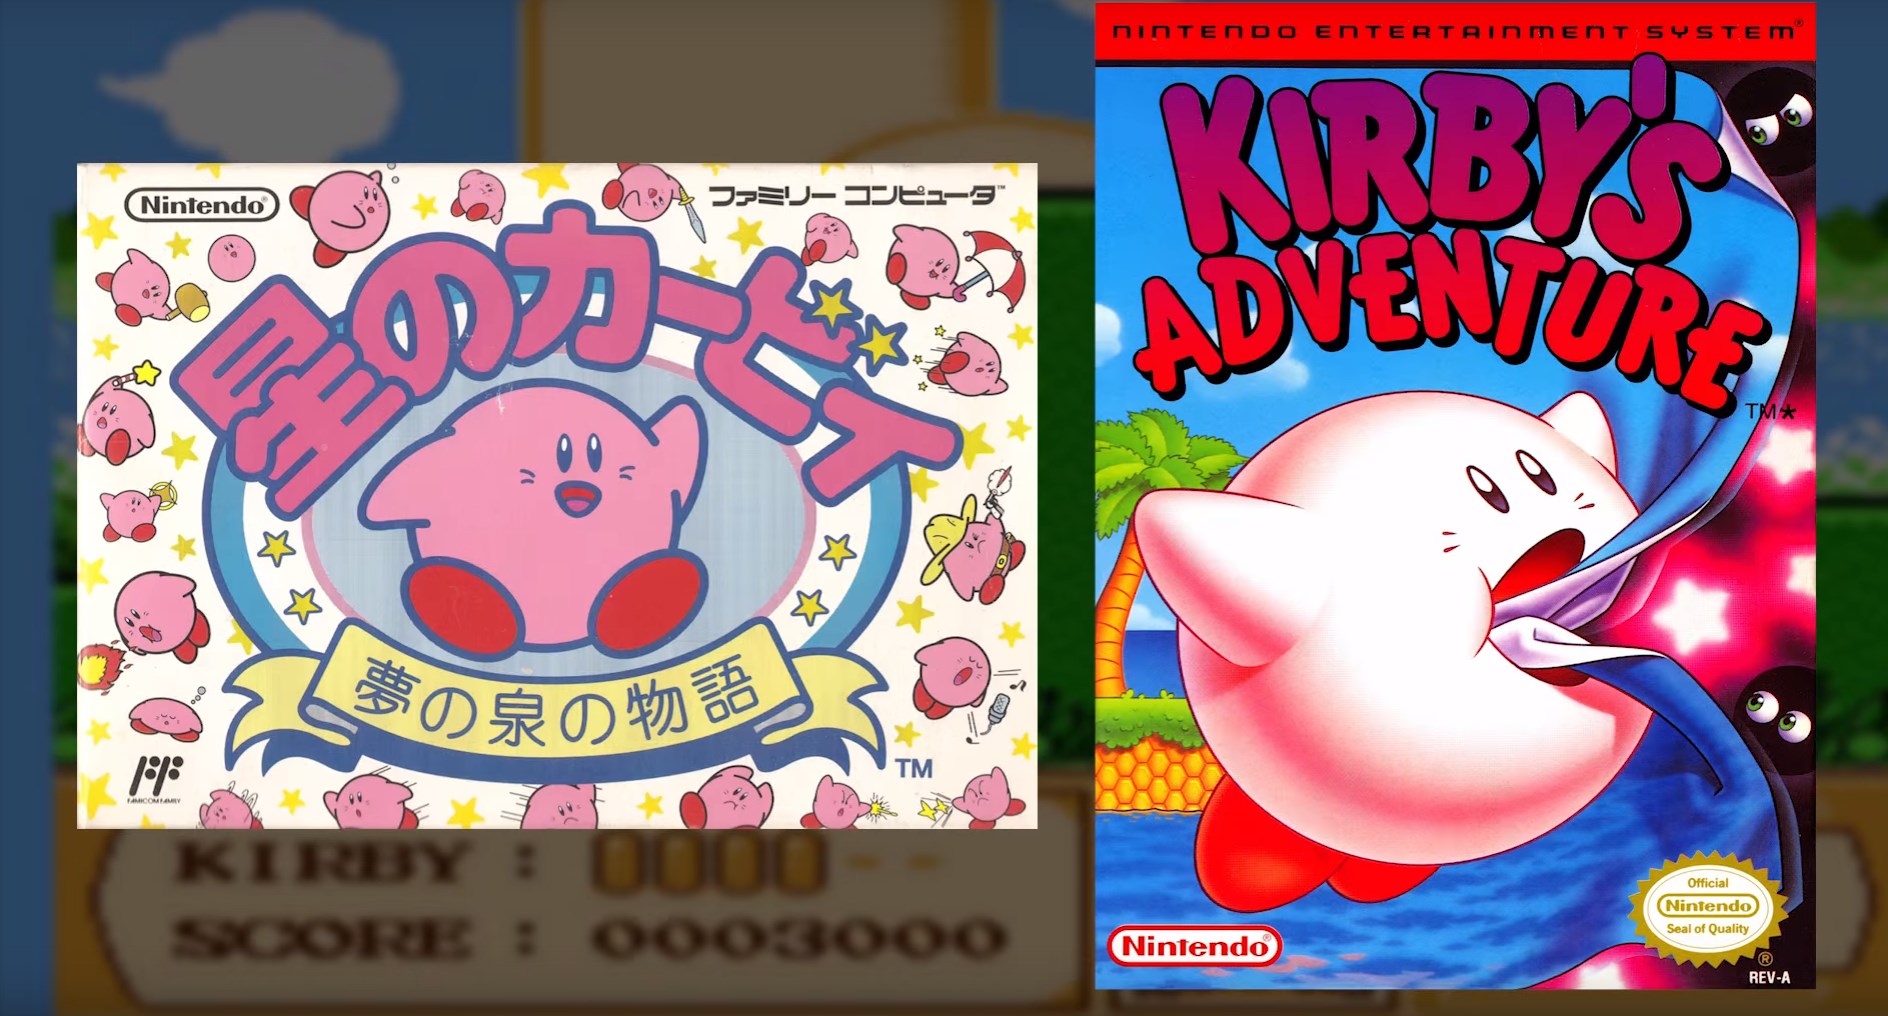 Kirby and Tinkle Popo in Nintendo History